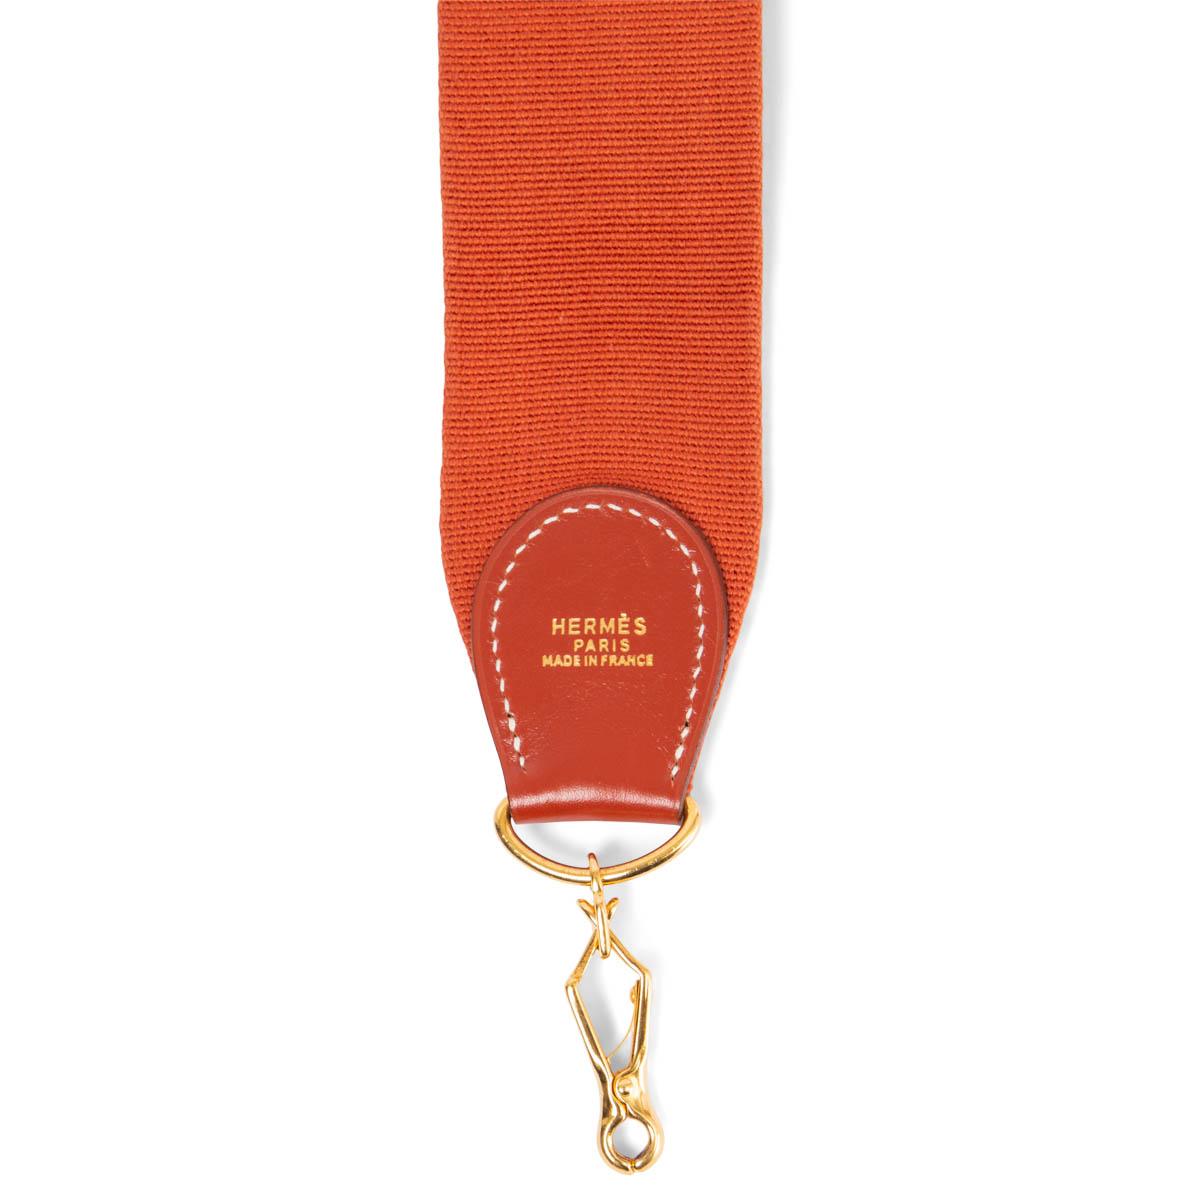 100% authentic Hermès shoulder strap for your Kelly or Evelyne bag in Brique (brick red) canvas and Box leather. Has been carried and is in excellent condition.

Measurements
Width	5cm (2in)
Length	110cm (42.9in)
Hardware	Gold-Tone

All our listings